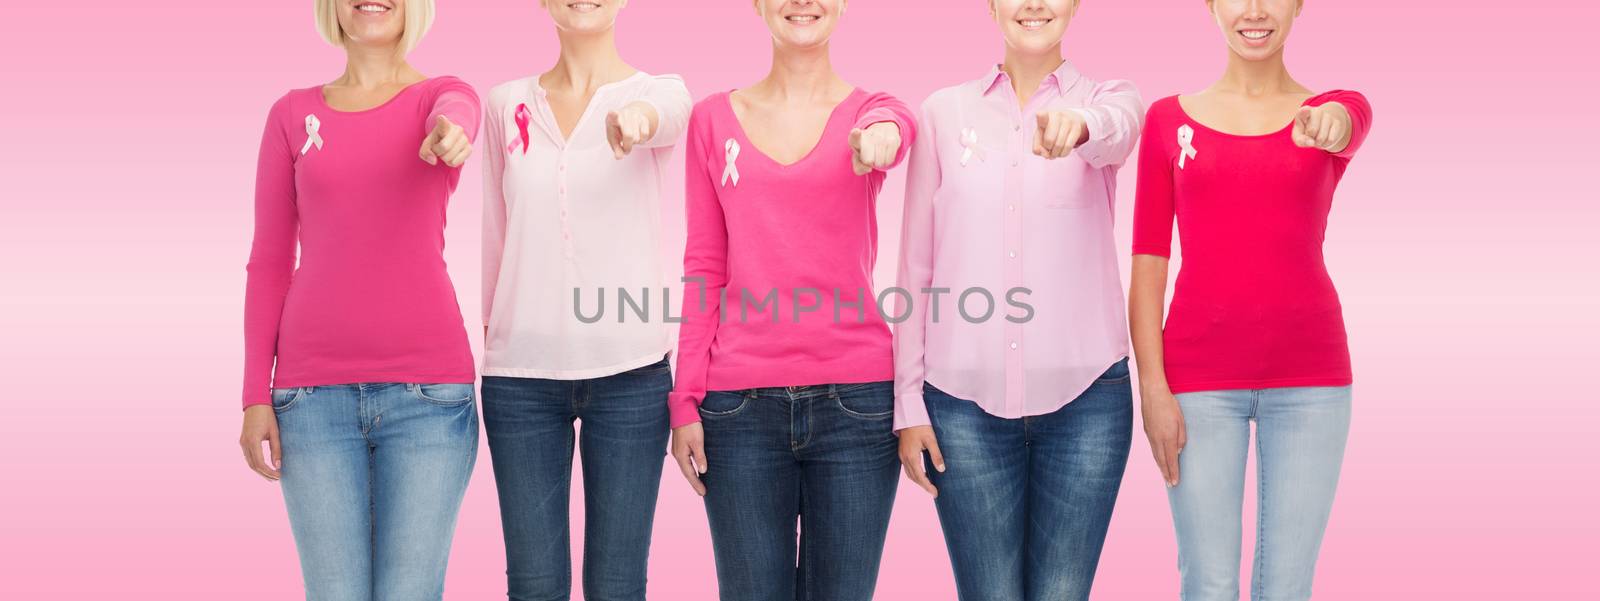 healthcare, people, gesture and medicine concept - close up of smiling women in blank shirts with breast cancer awareness ribbons pointing on you over pink background